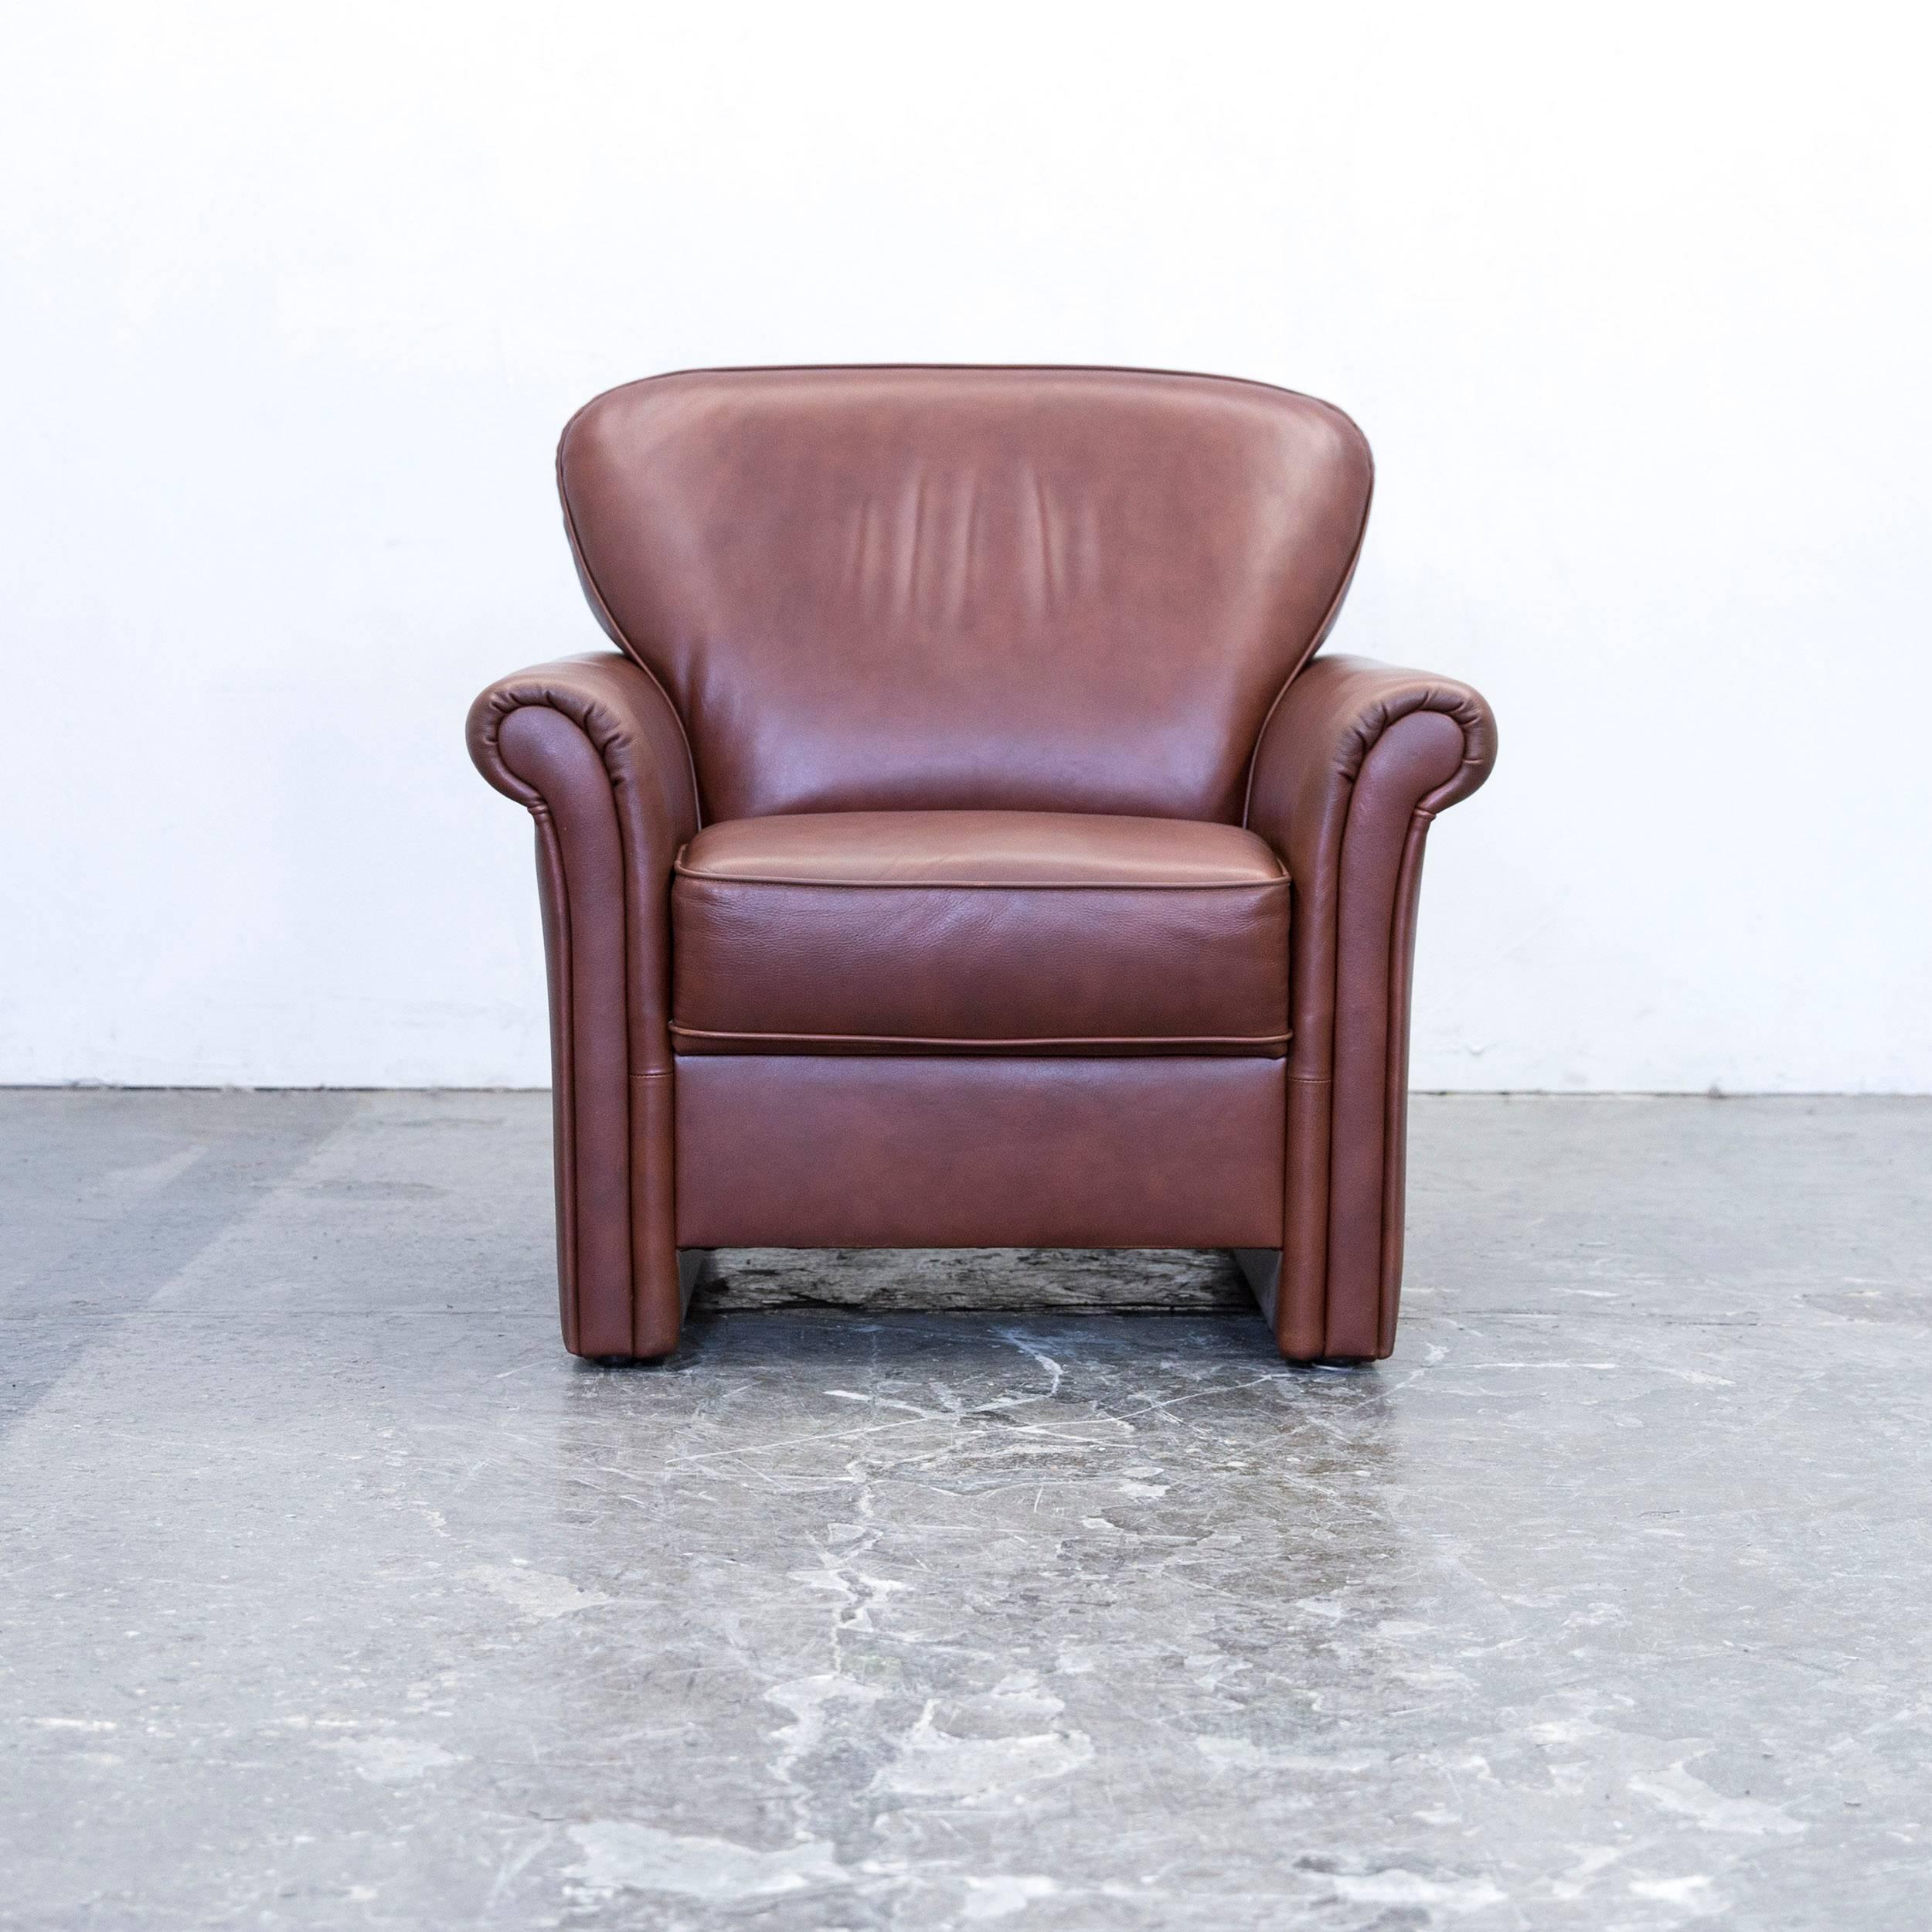 Brown colored original Gepade Akad`or designer leather armchair, in a minimalistic and modern design, made for pure comfort.